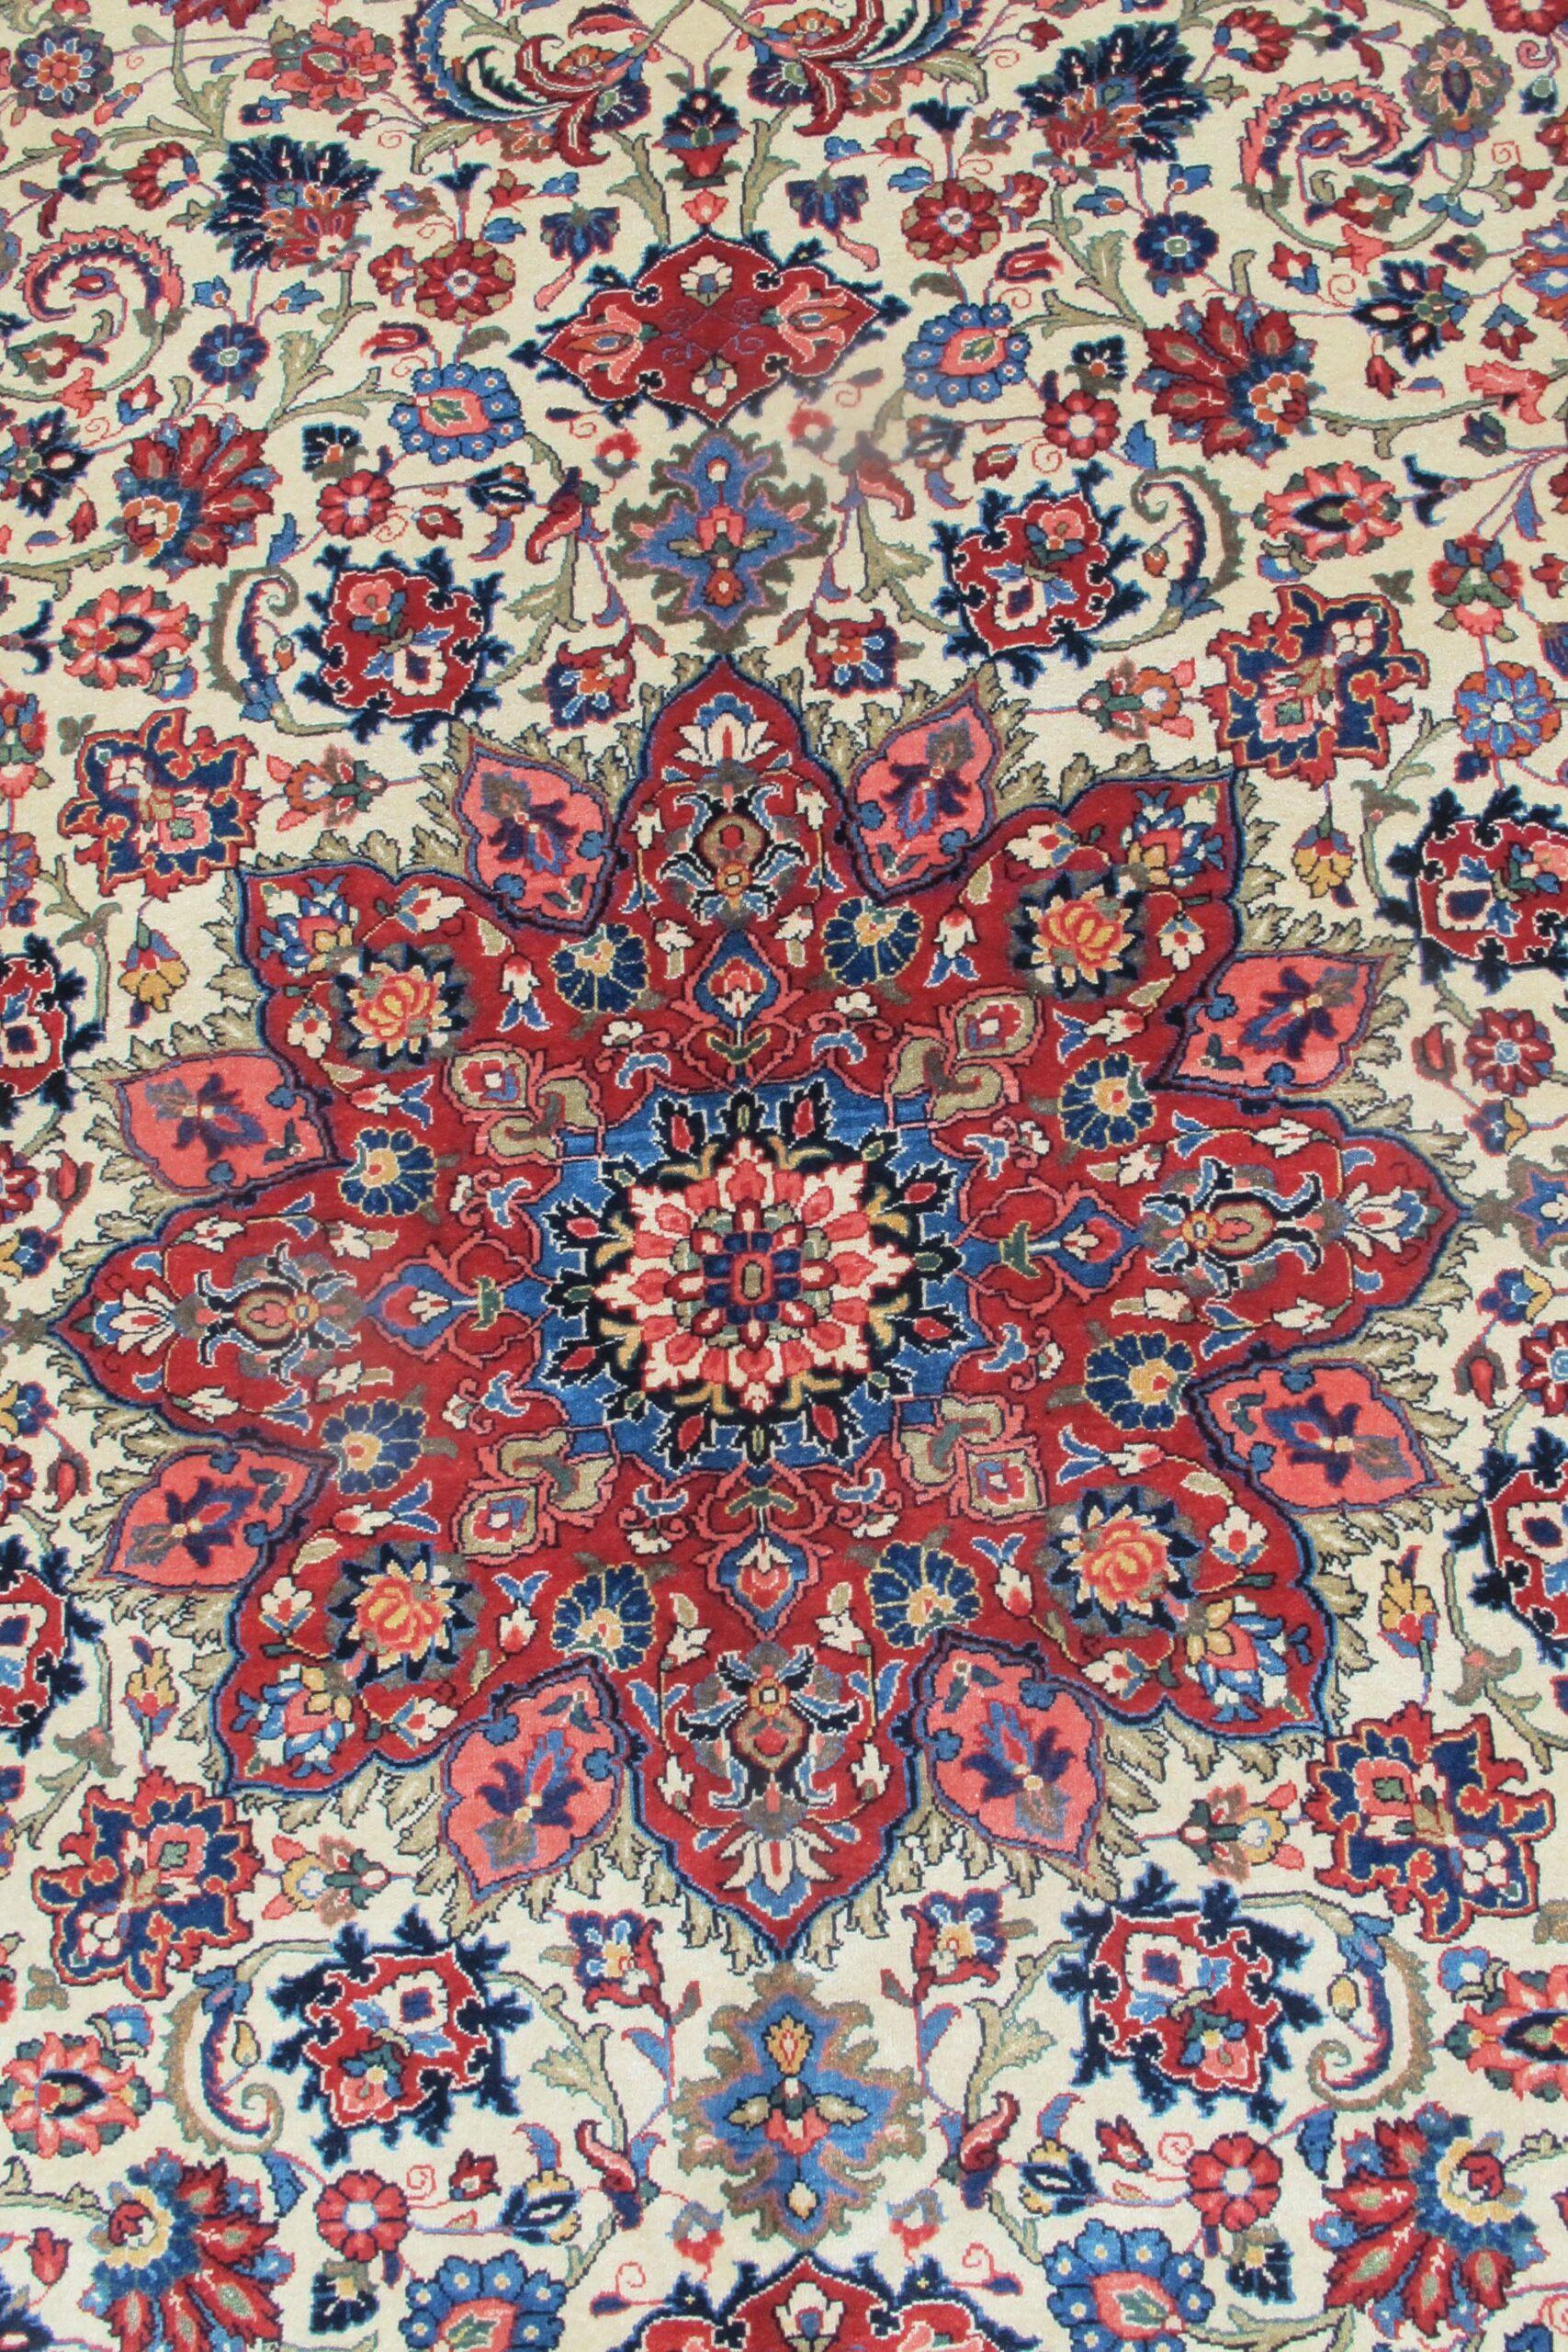 Persian Dabir Kashan Carpet, Mid-20th Century

Private collection of Albert Keshishian. Unused mint condition.

Additional Information:
Dimensions: 10'0